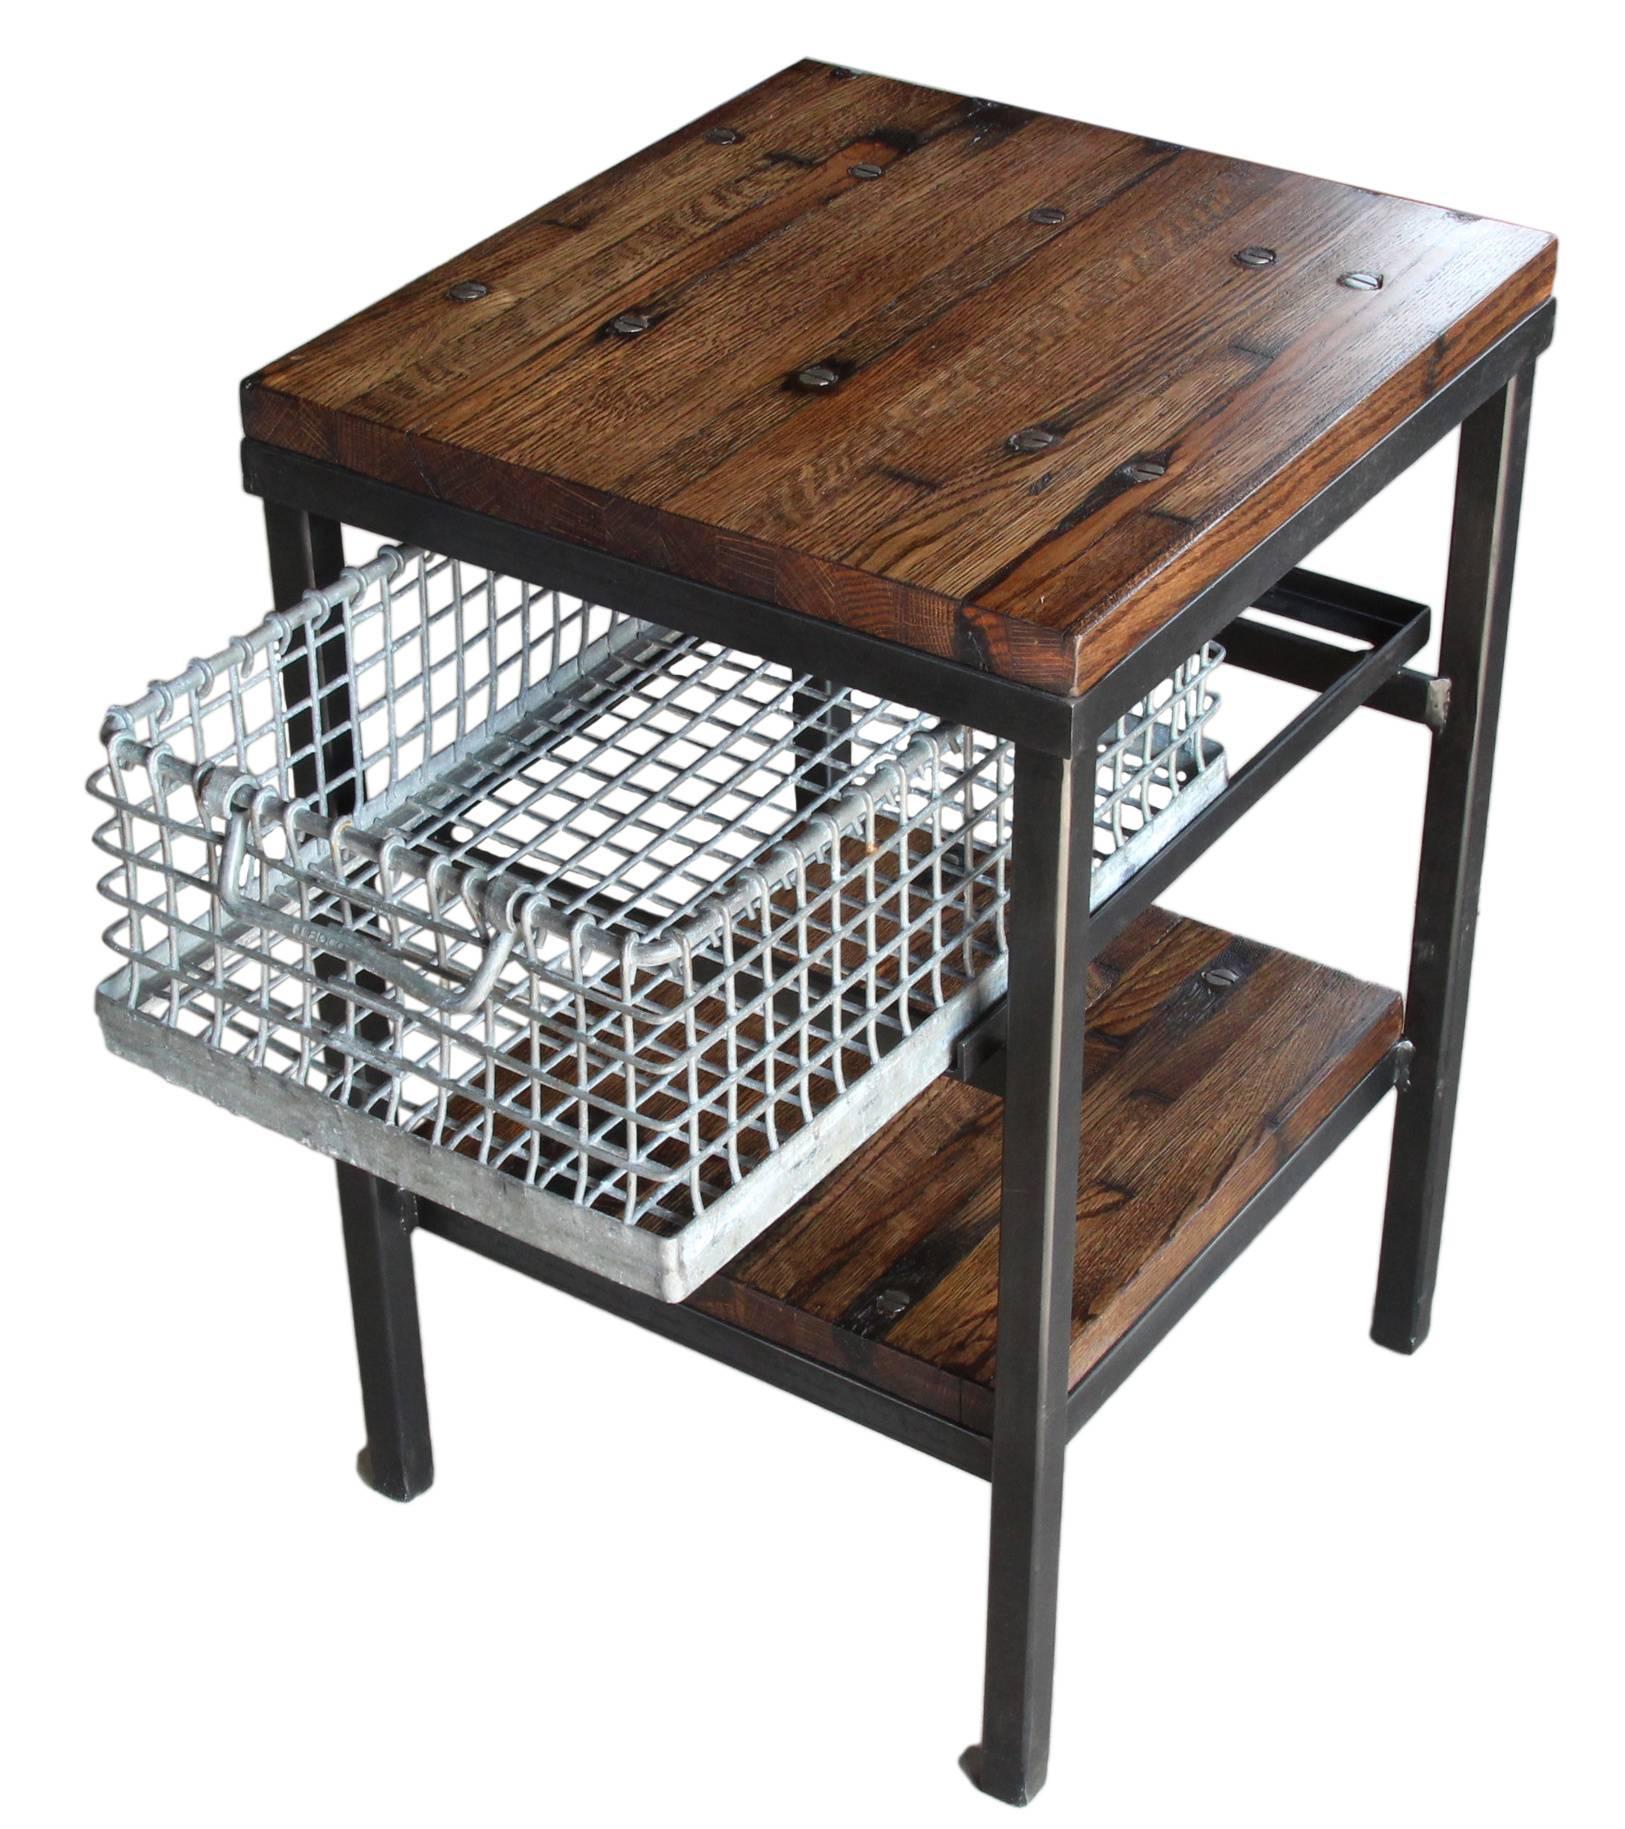 Unique Industrial style end table or end table made from reclaimed Industrial flooring featuring a galvanized basket for storage. Please allow 8-9 weeks for manufacturing.
Please note since each table is custom built each table varies slightly due